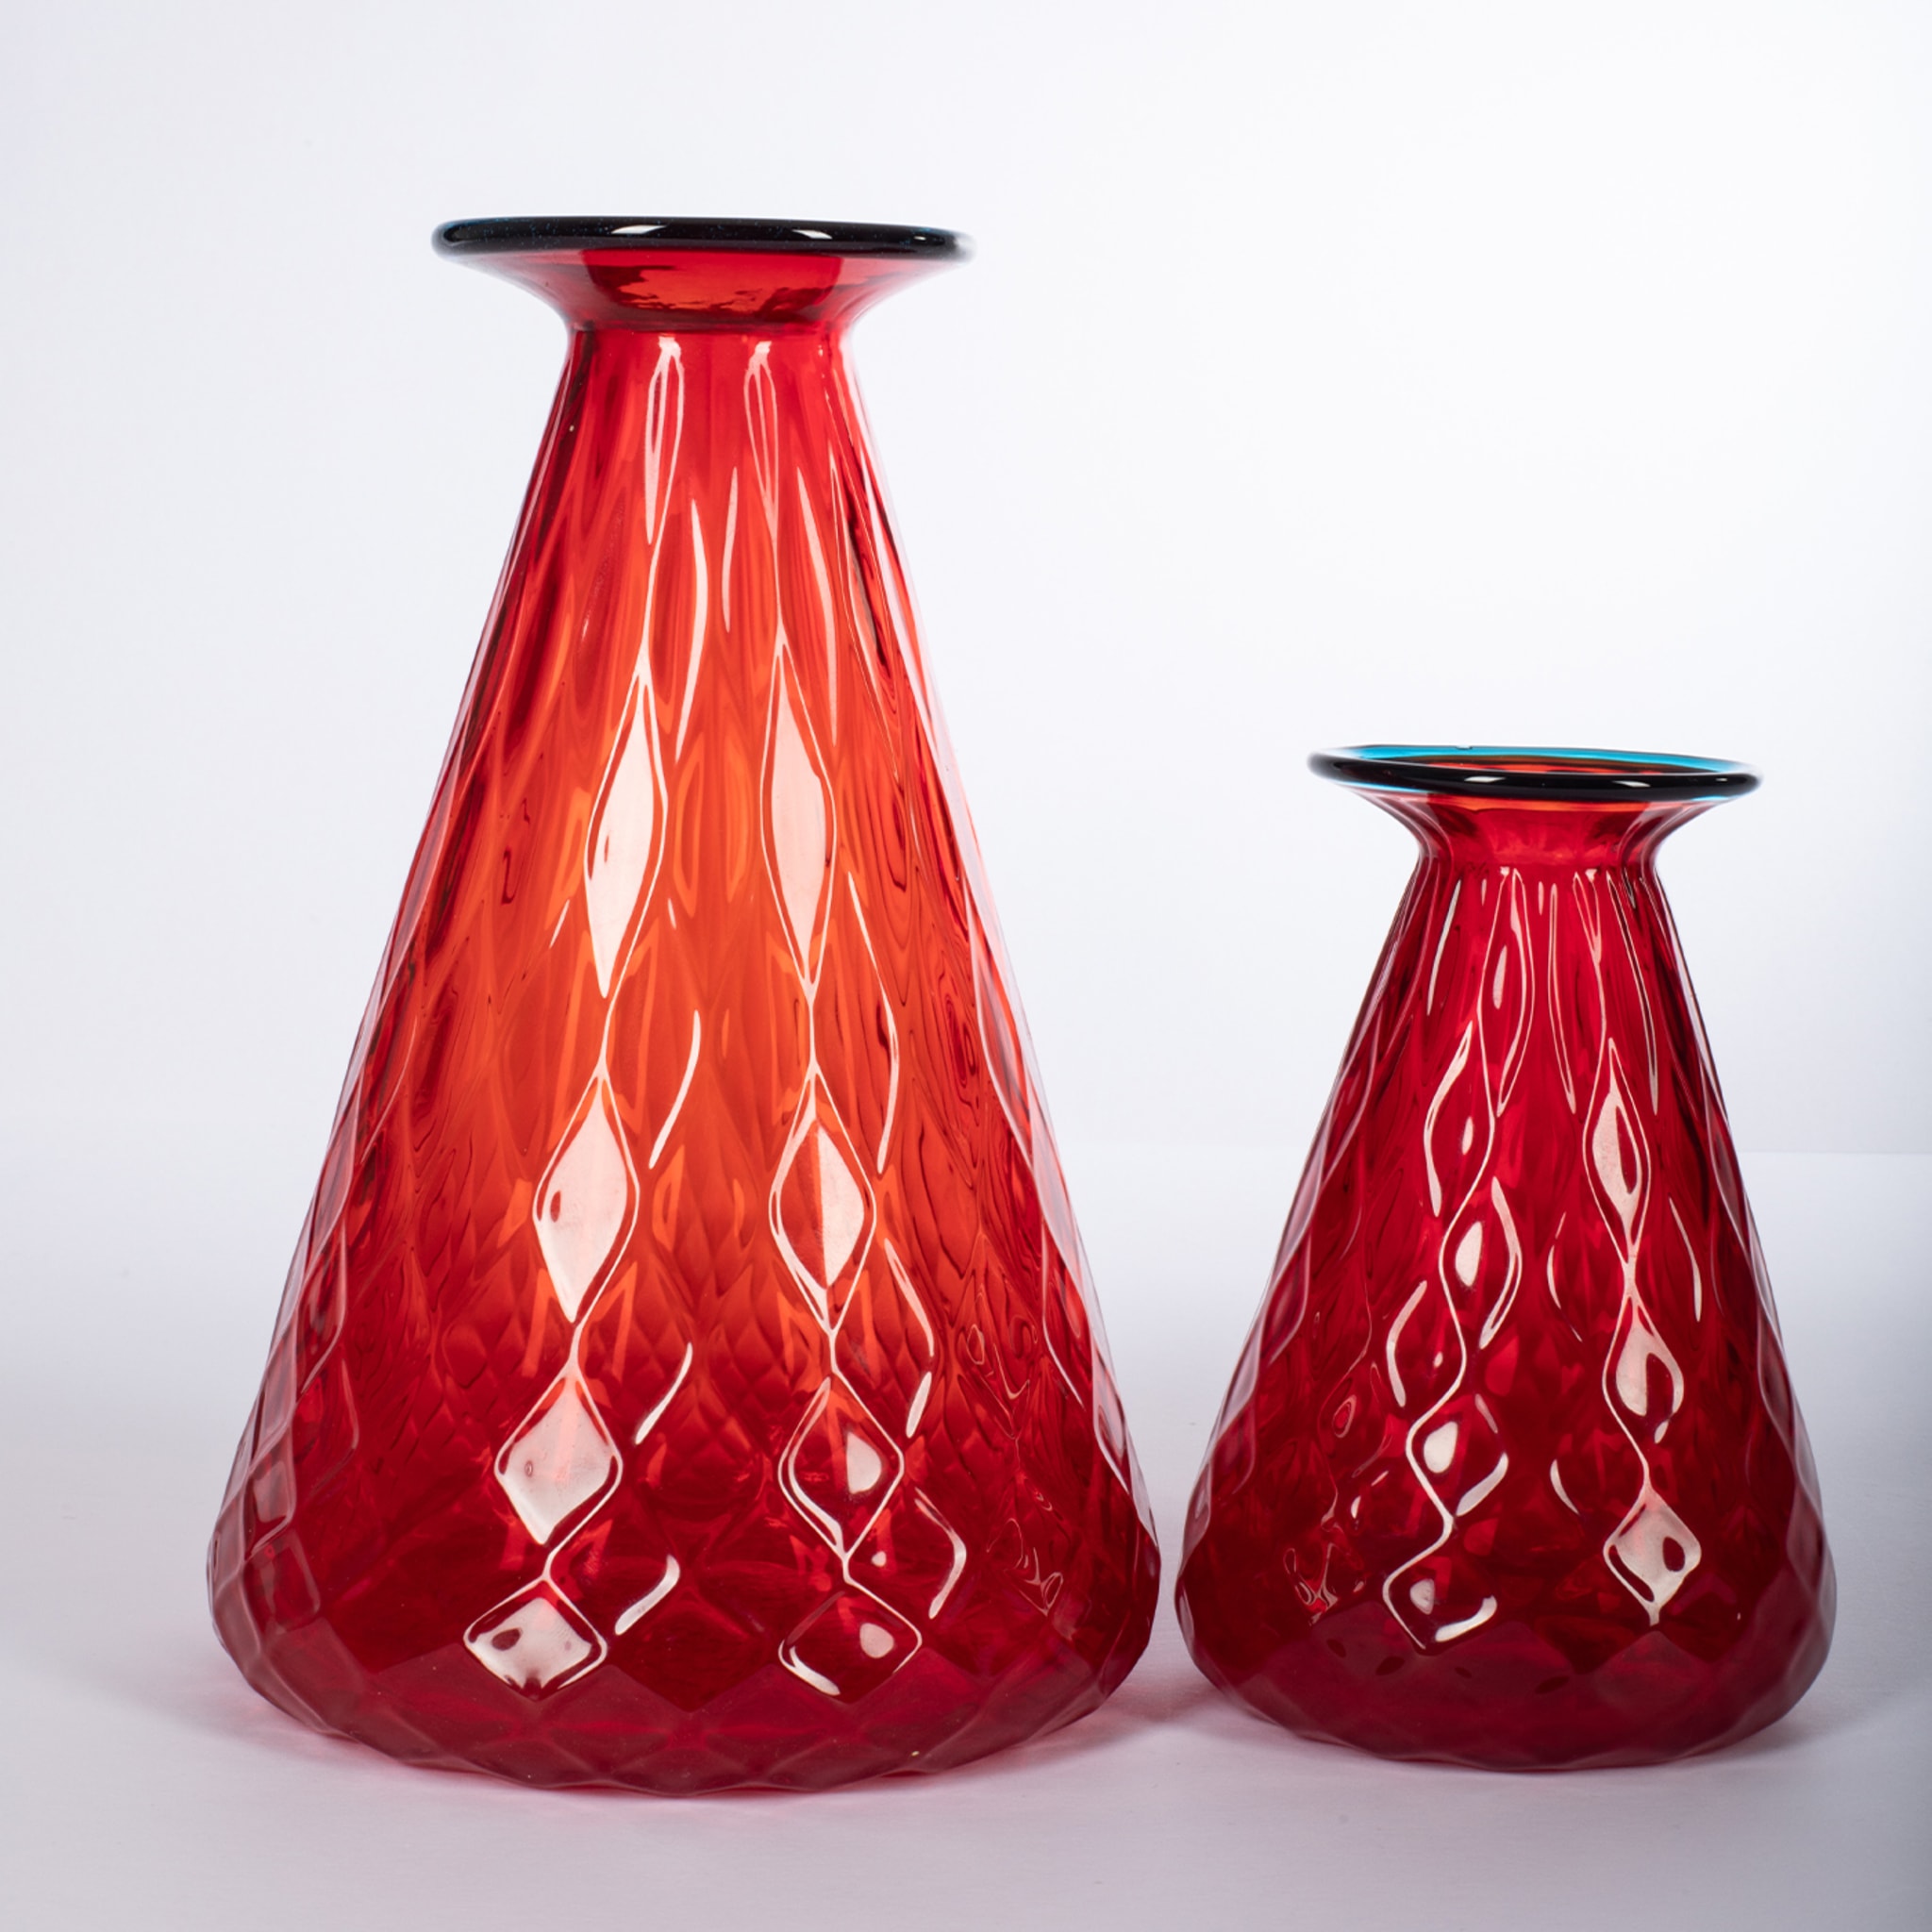 Balloton Set of 2 Conical Red Vases - Alternative view 3